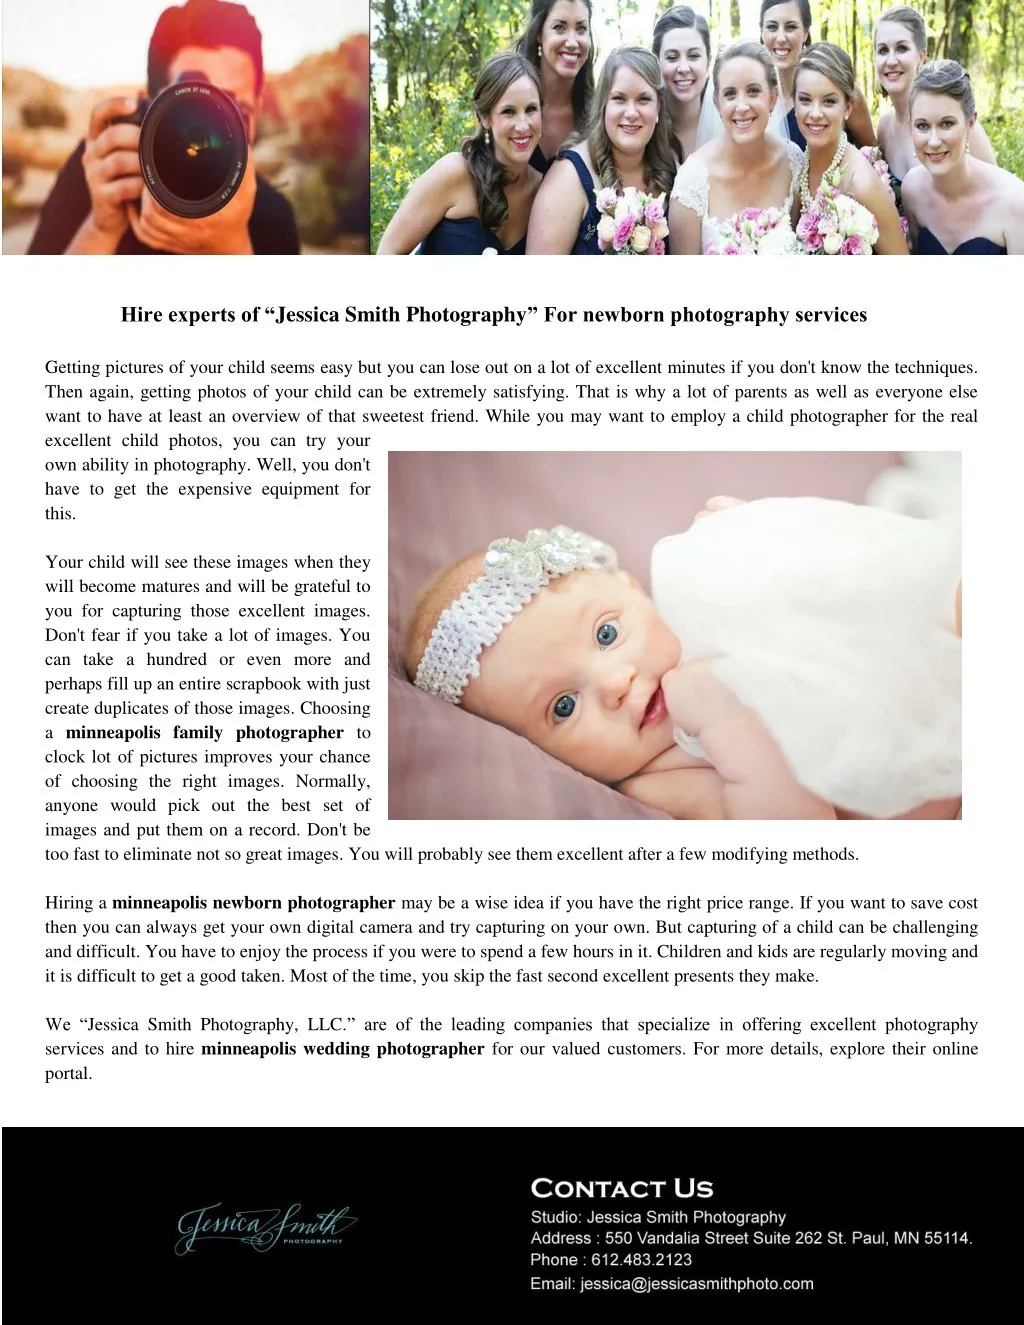 hire experts of jessica smith photography